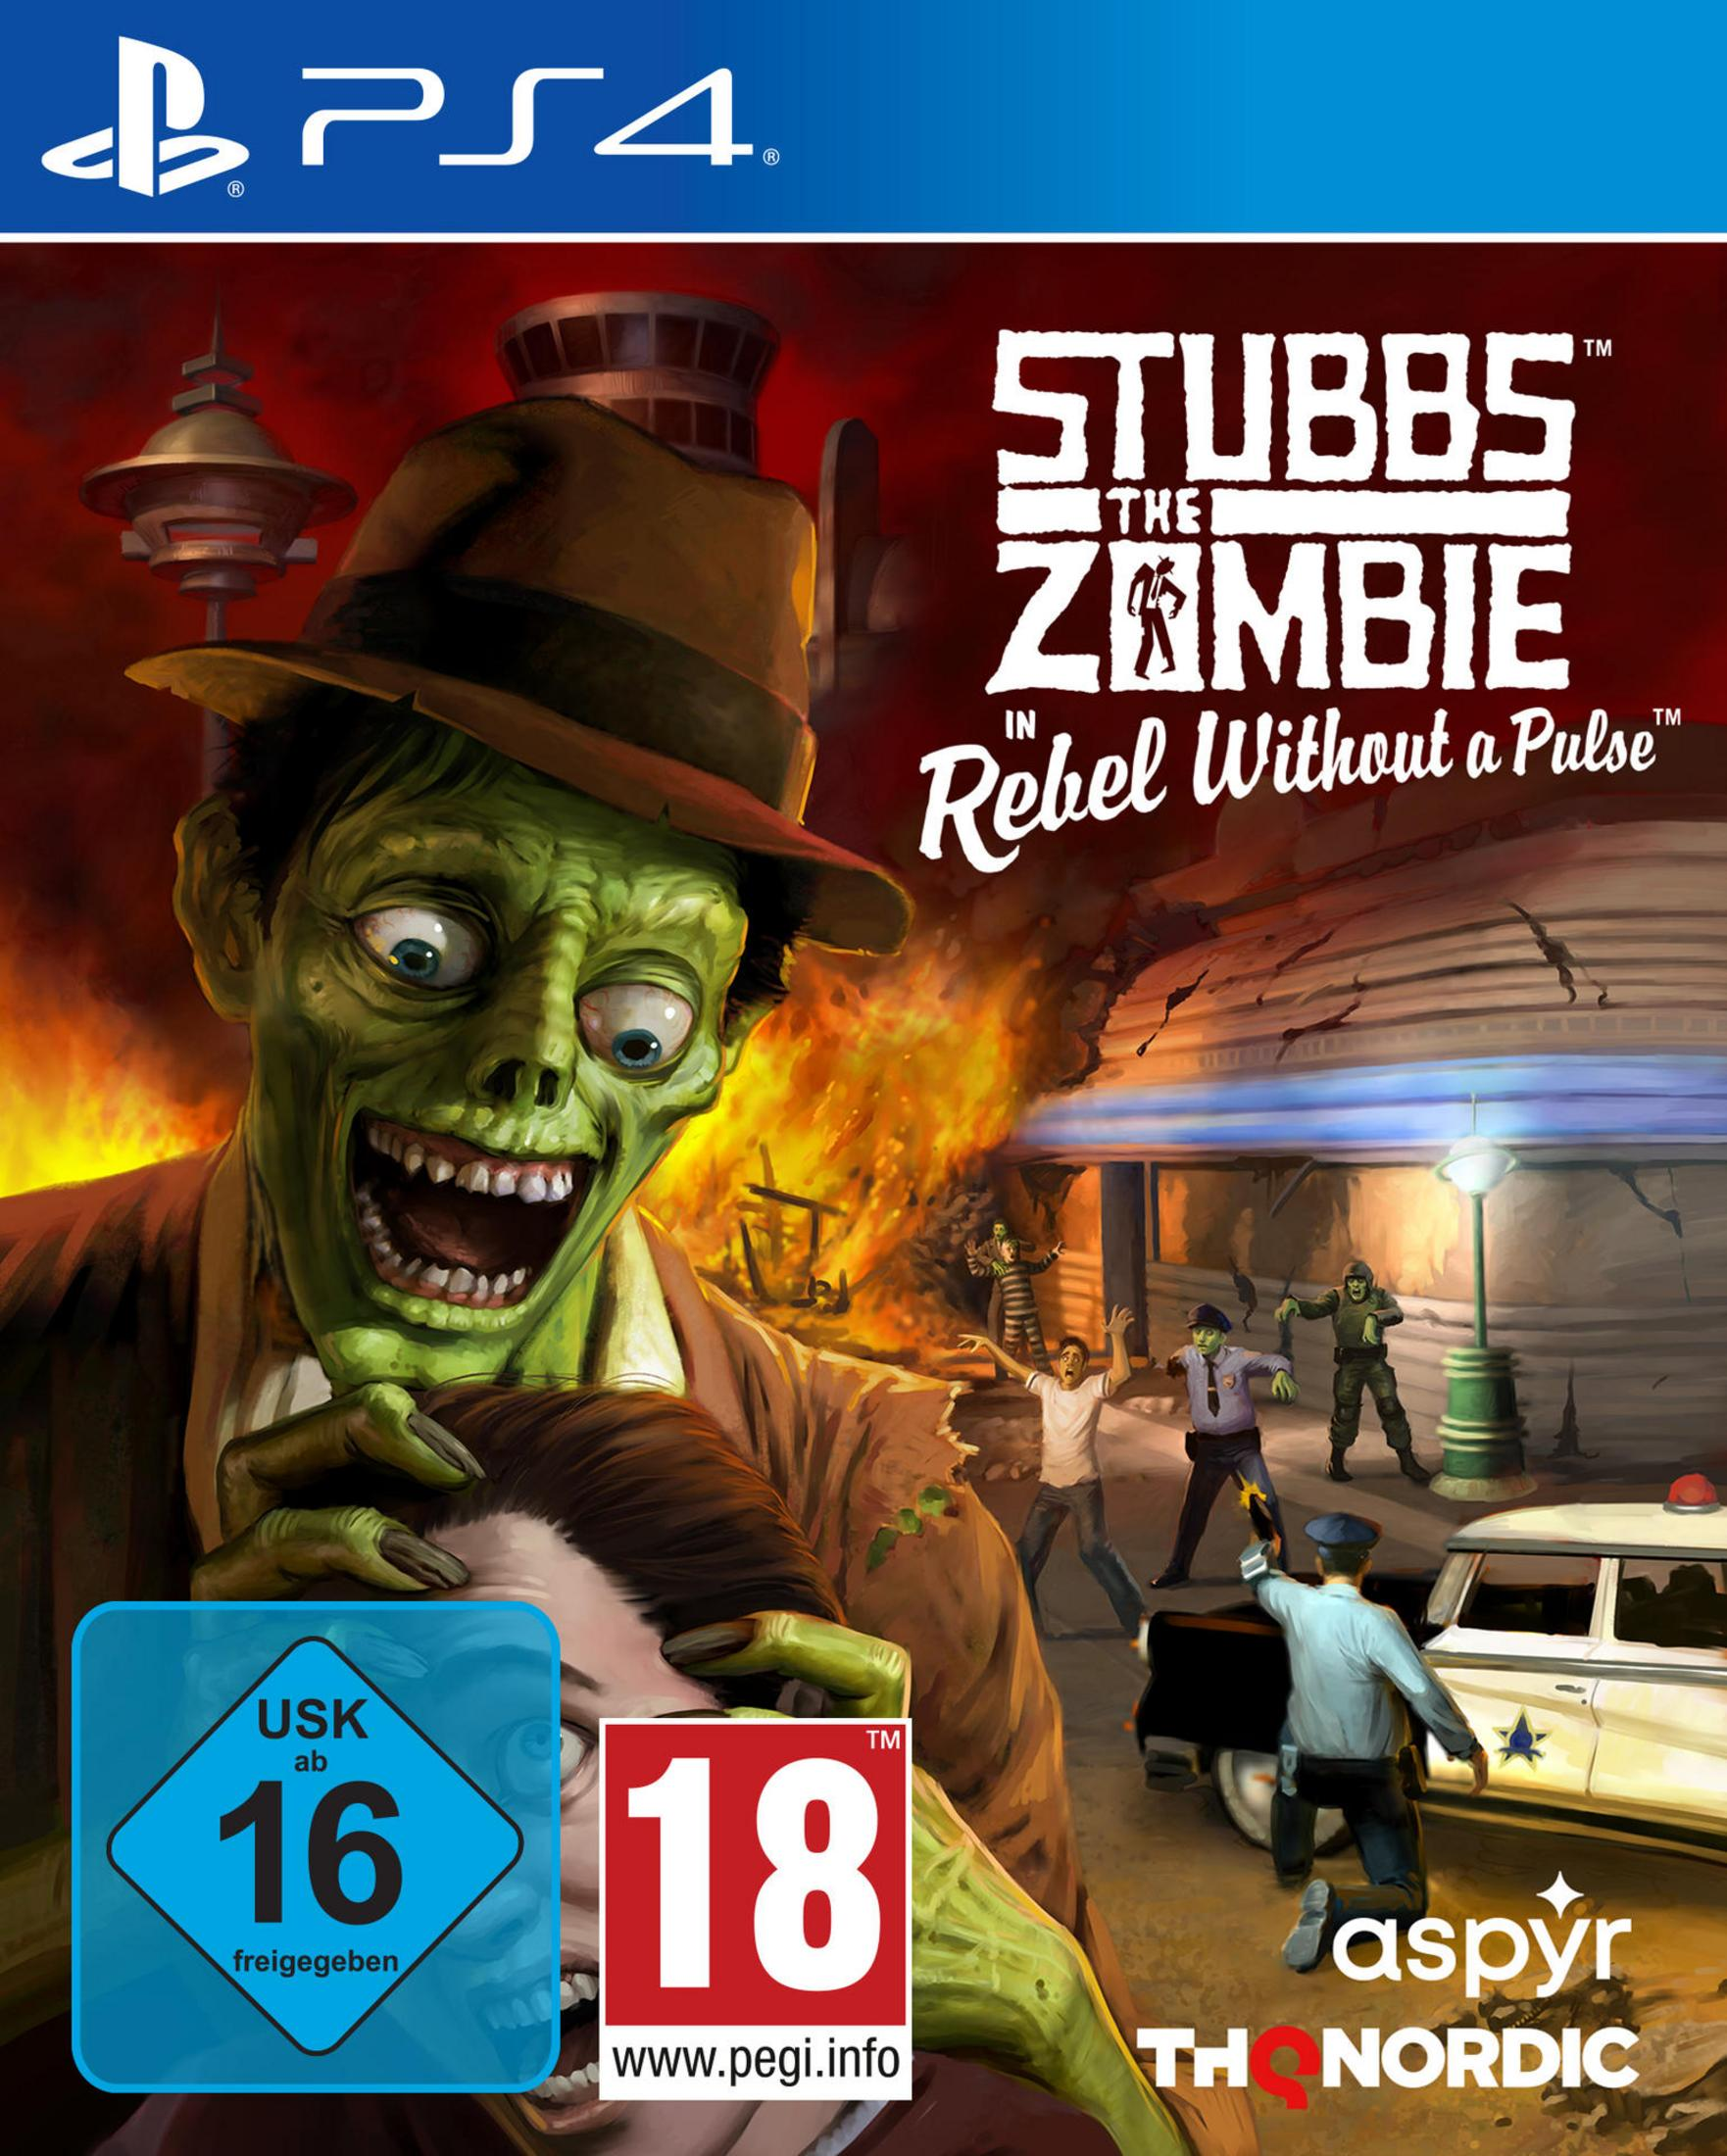 Stubbs the Zombie PS-4 in [PlayStation - Pulse Rebel a 4] Without